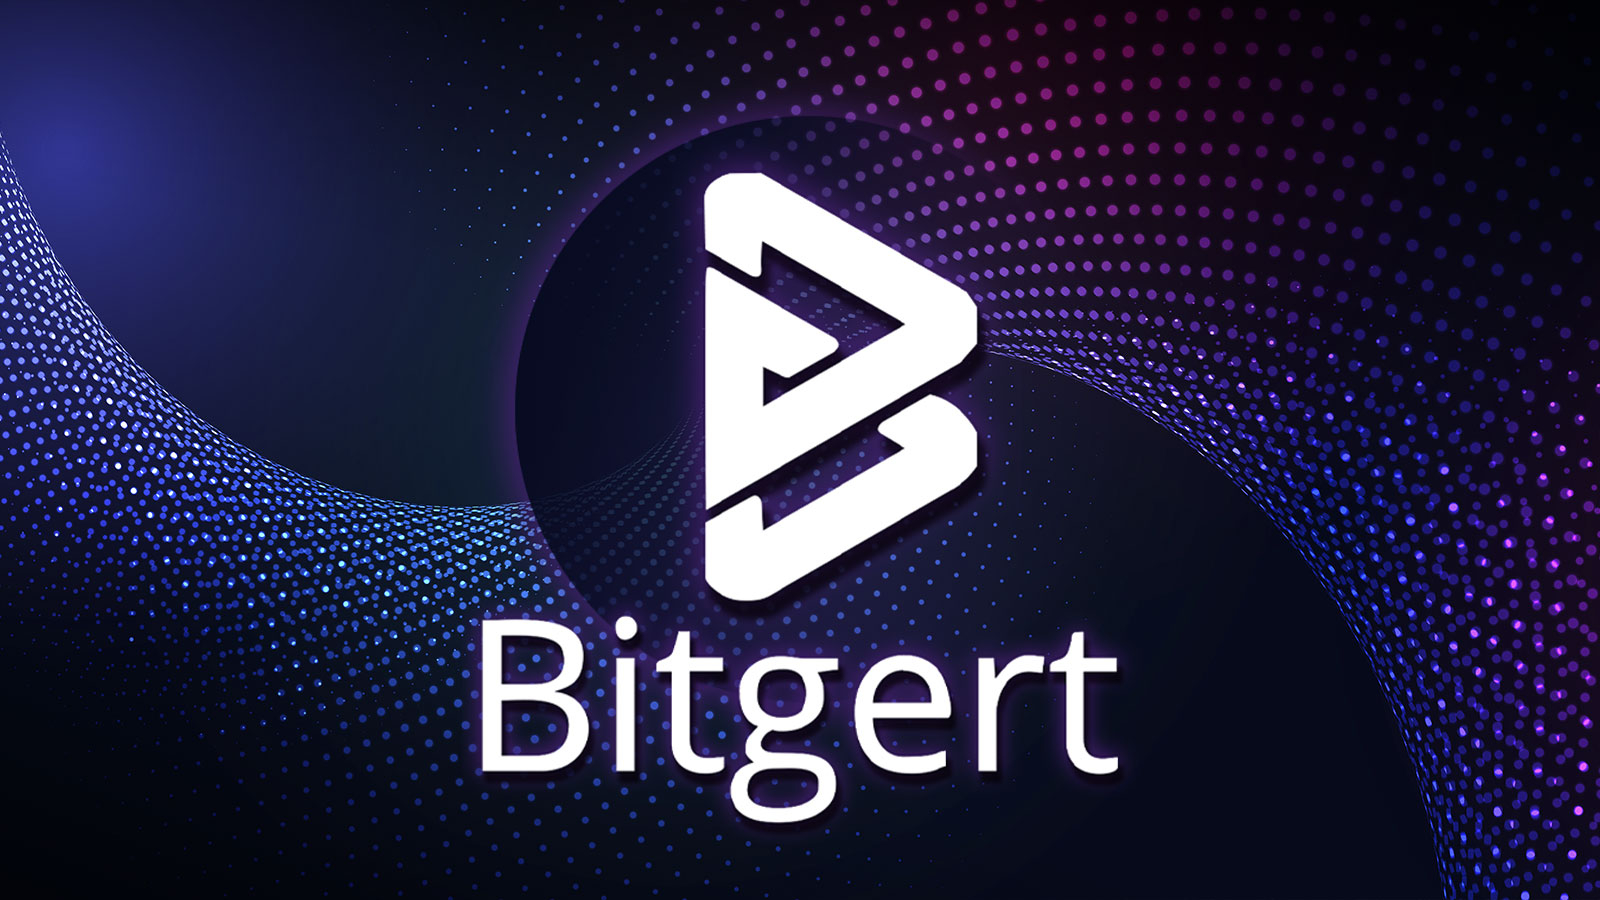 Cardano and Solana Show Market Resilience, Bitgert Focuses On Ecosystem Growth